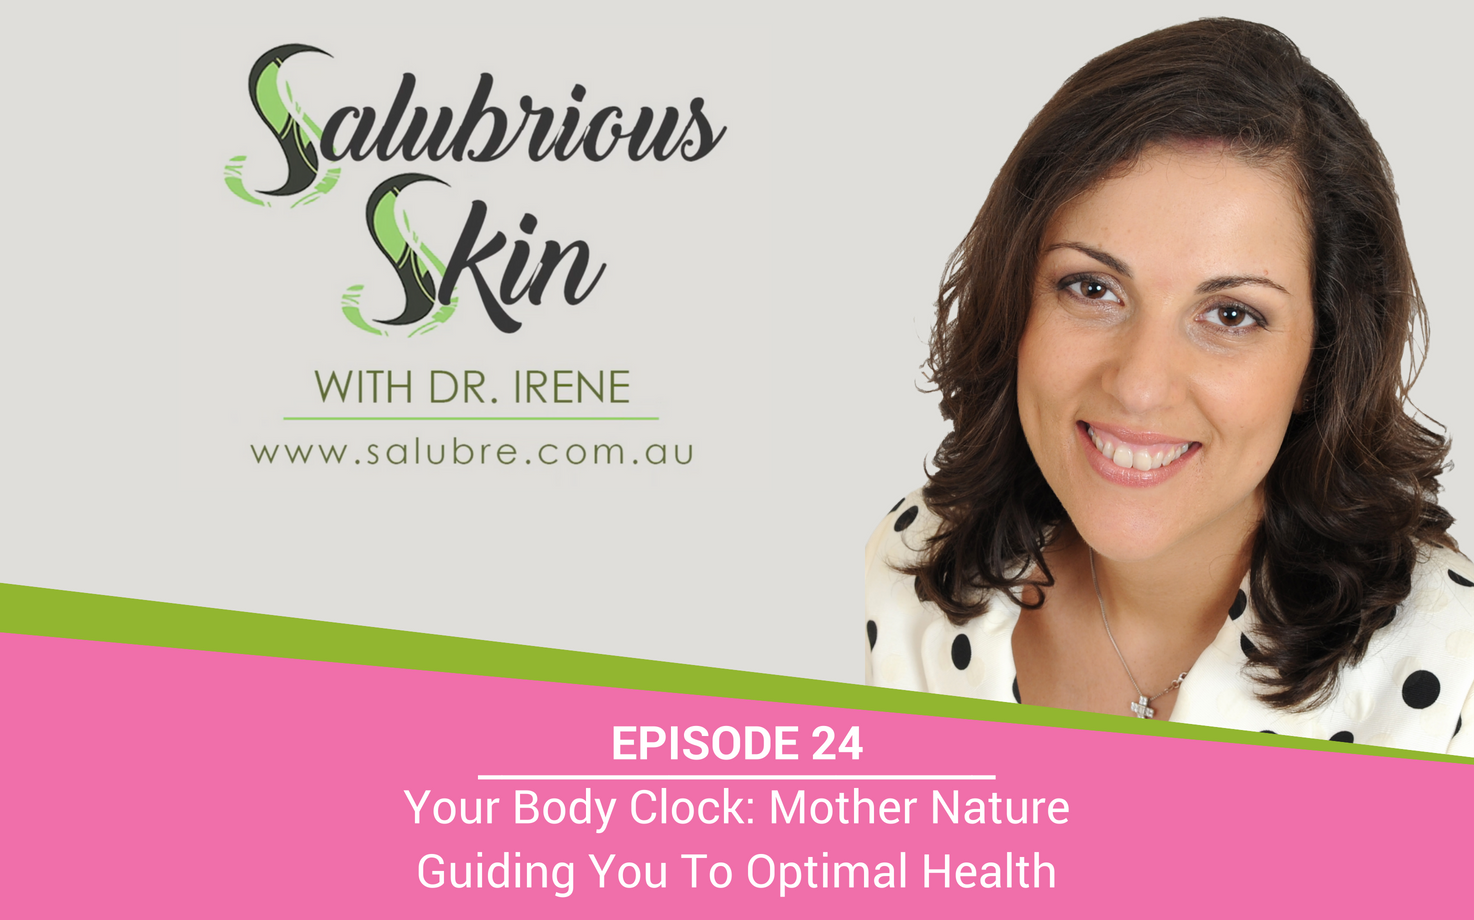 Episode 24: Your Body Clock - Mother Nature Guiding You To Optimal Health